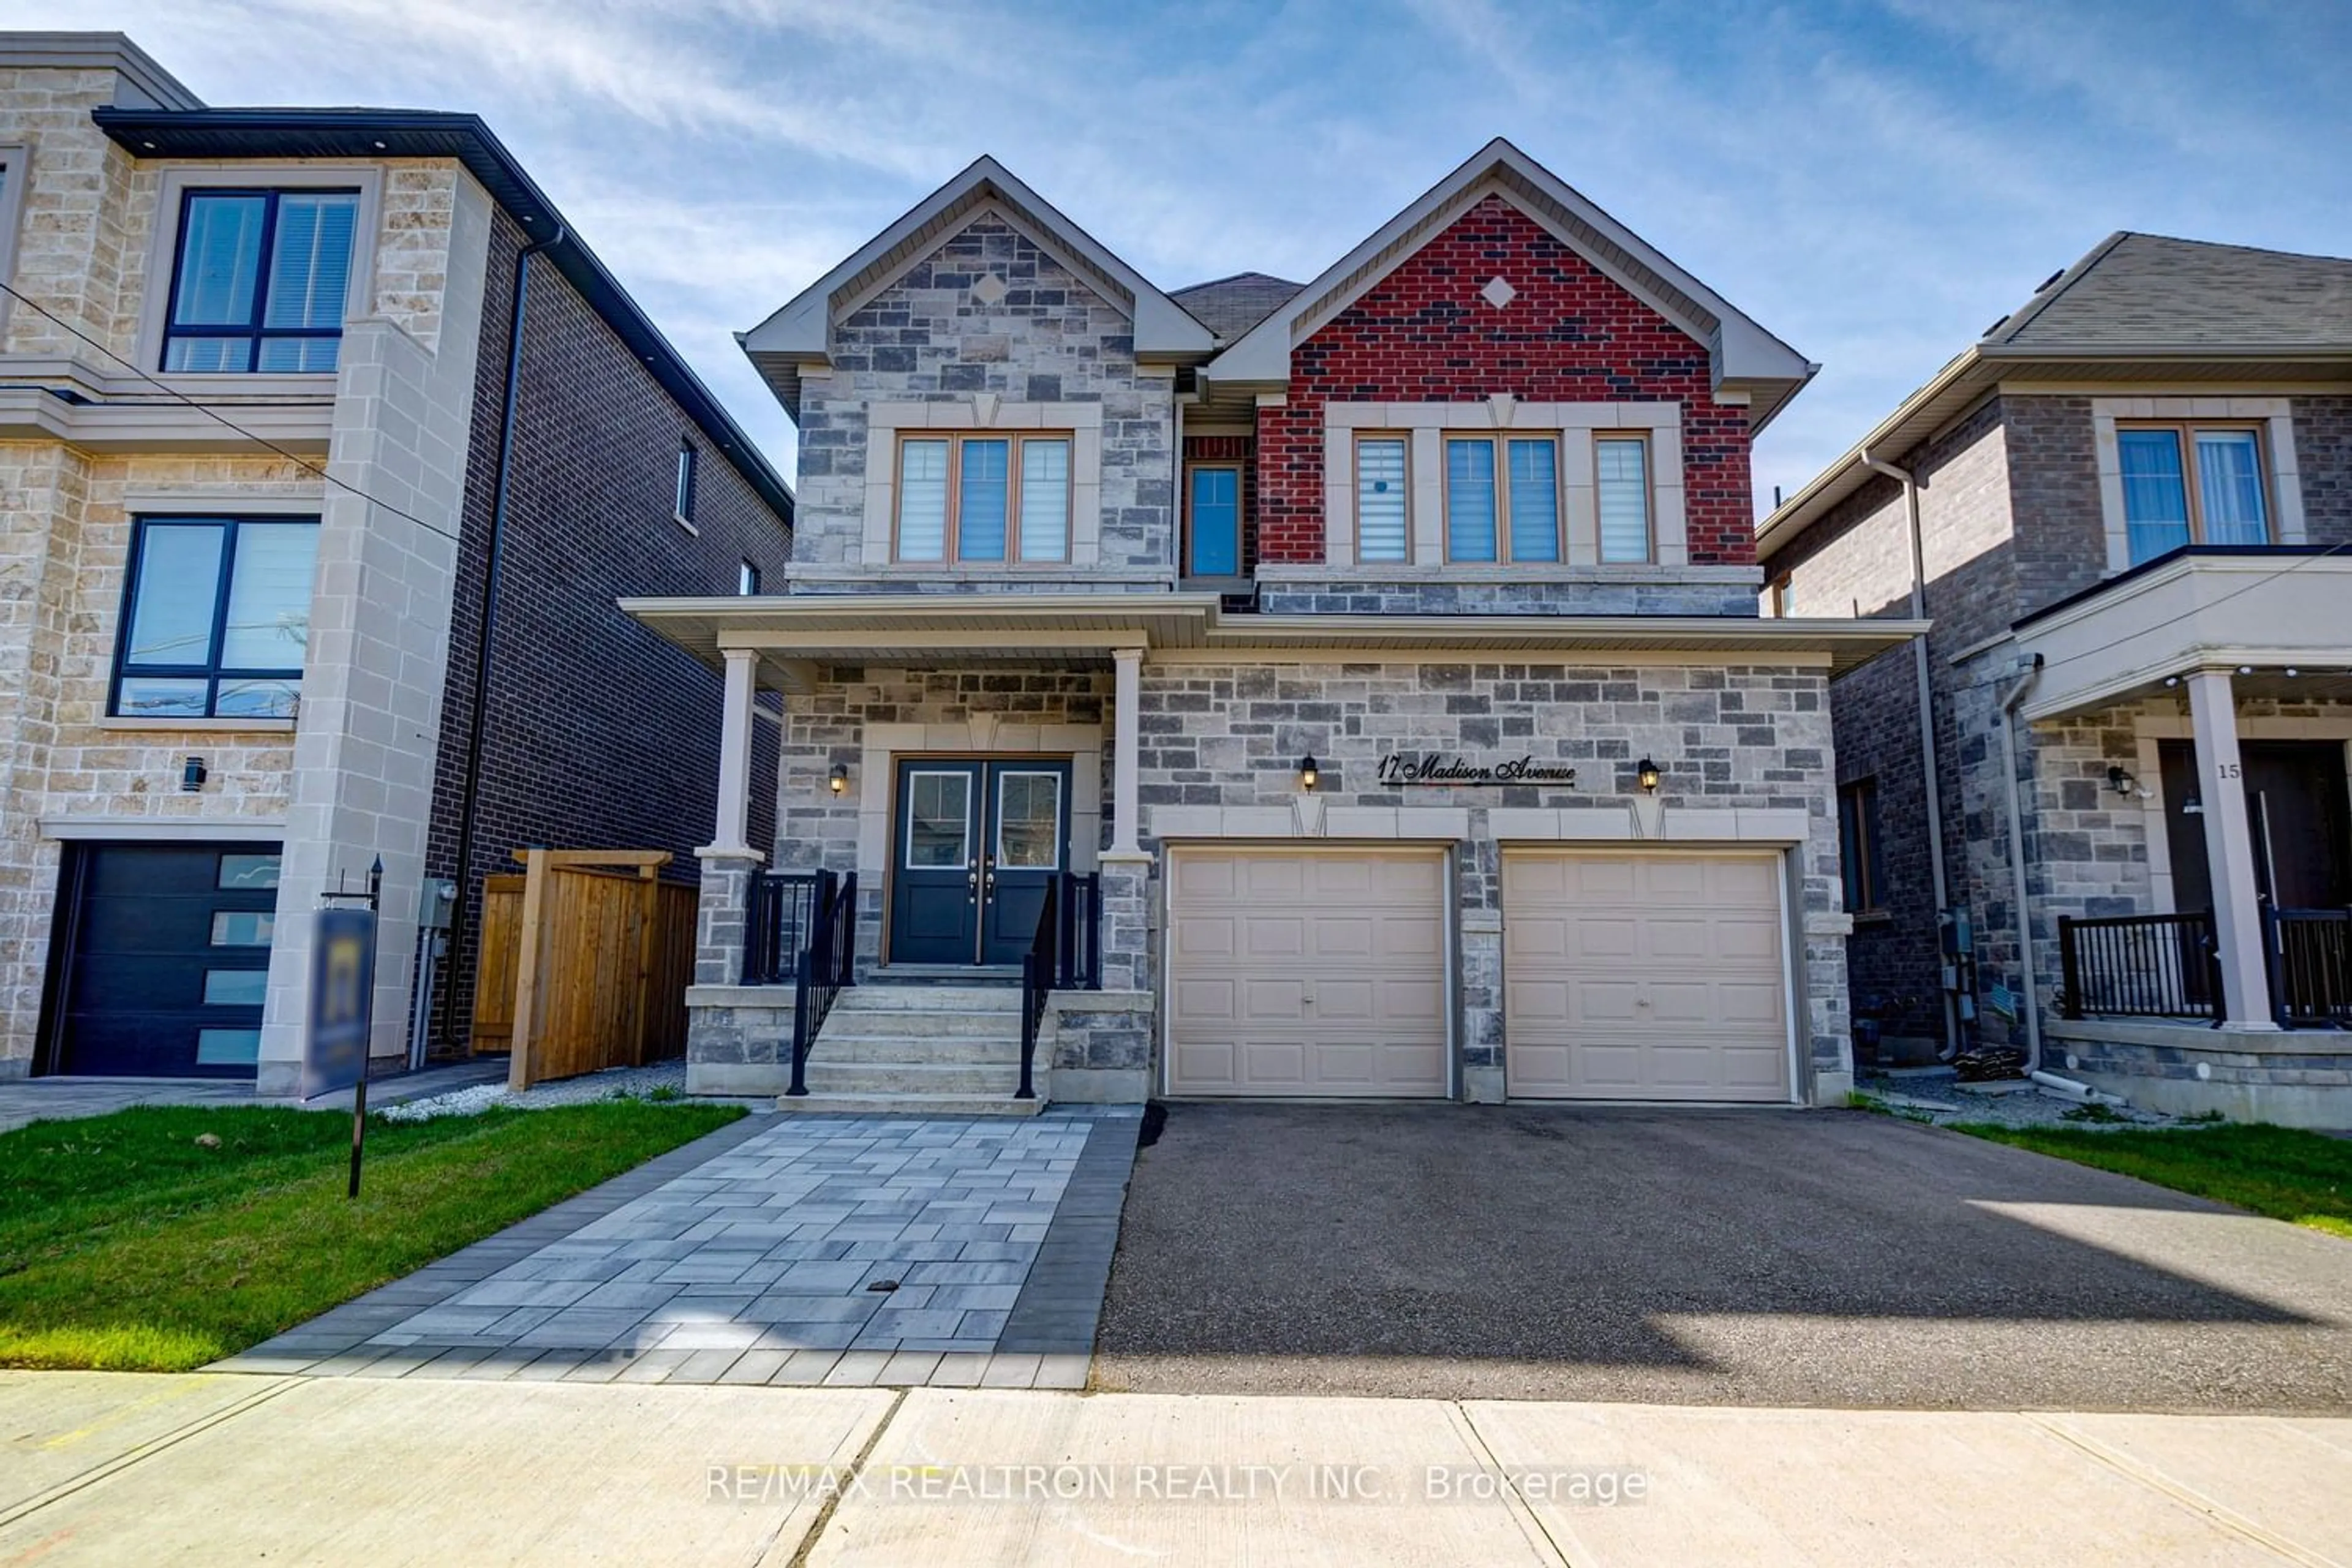 Home with brick exterior material for 17 Madison Ave, Richmond Hill Ontario L4E 2Z7